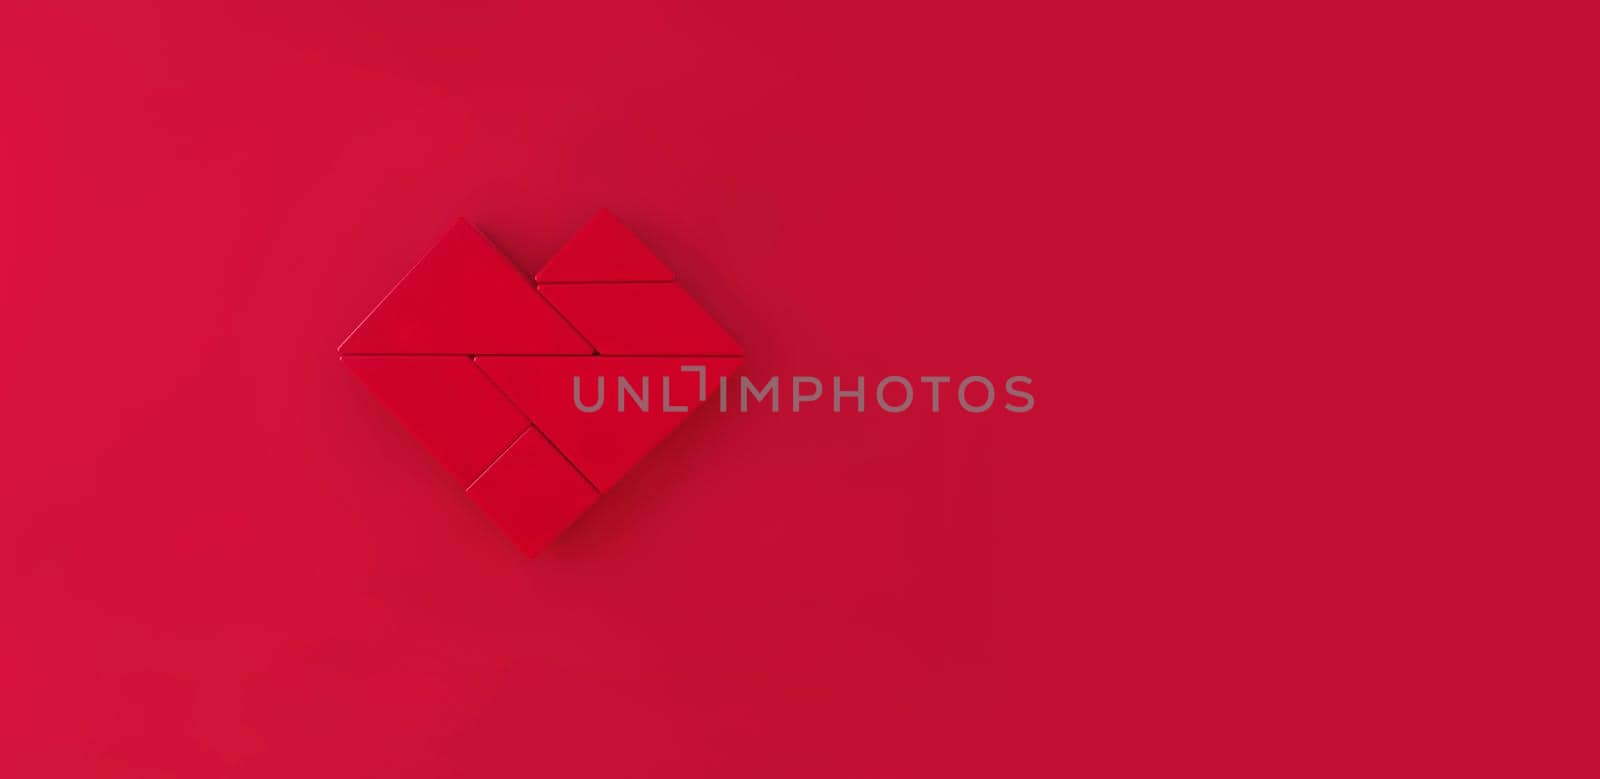 Red Heart tangram on red background with space for text. 3d rendering.